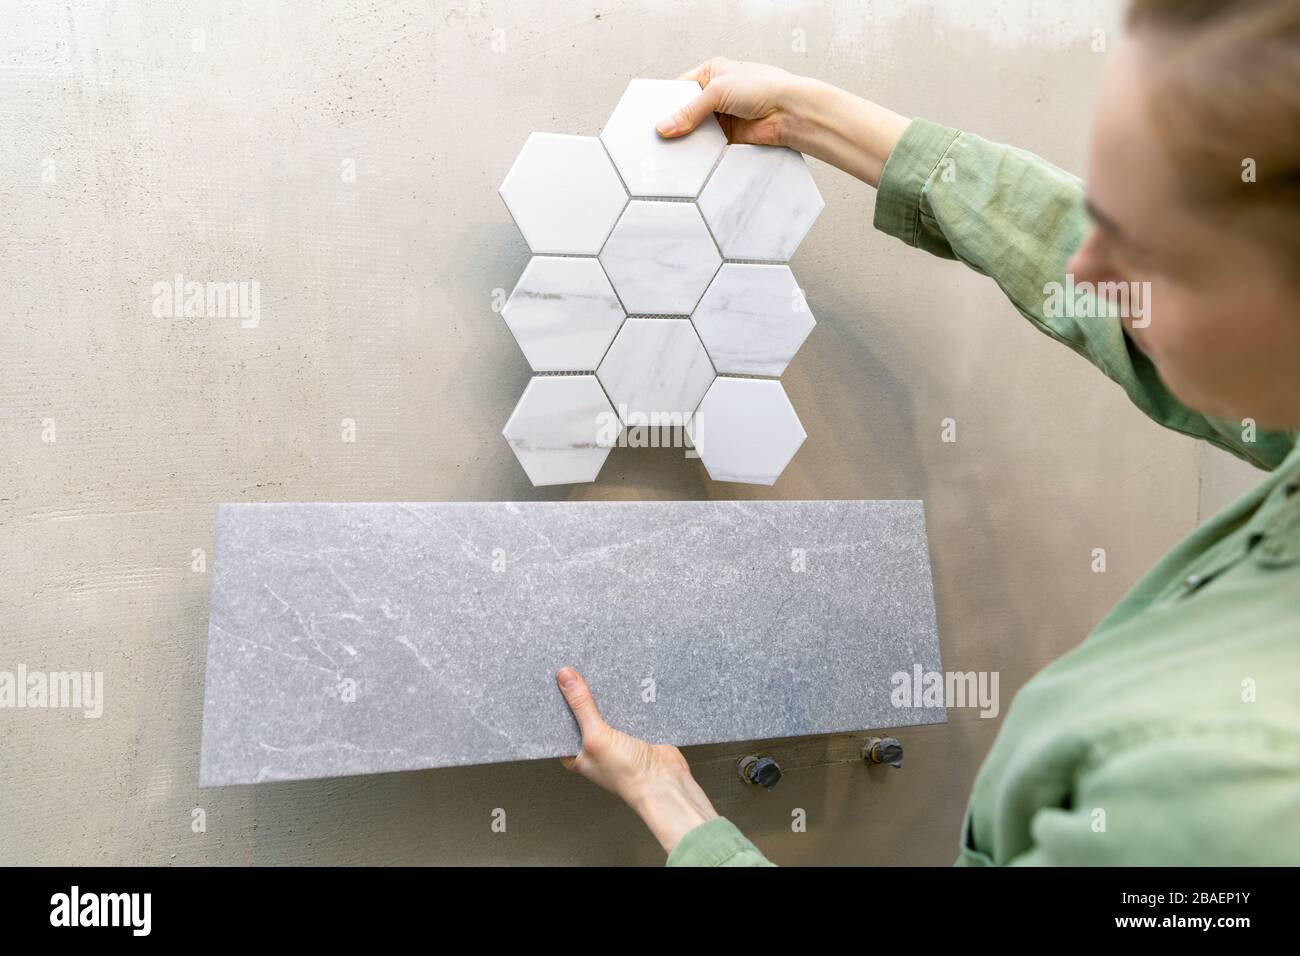 interior designer trying new tiles on the wall for bathroom interior design Stock Photo